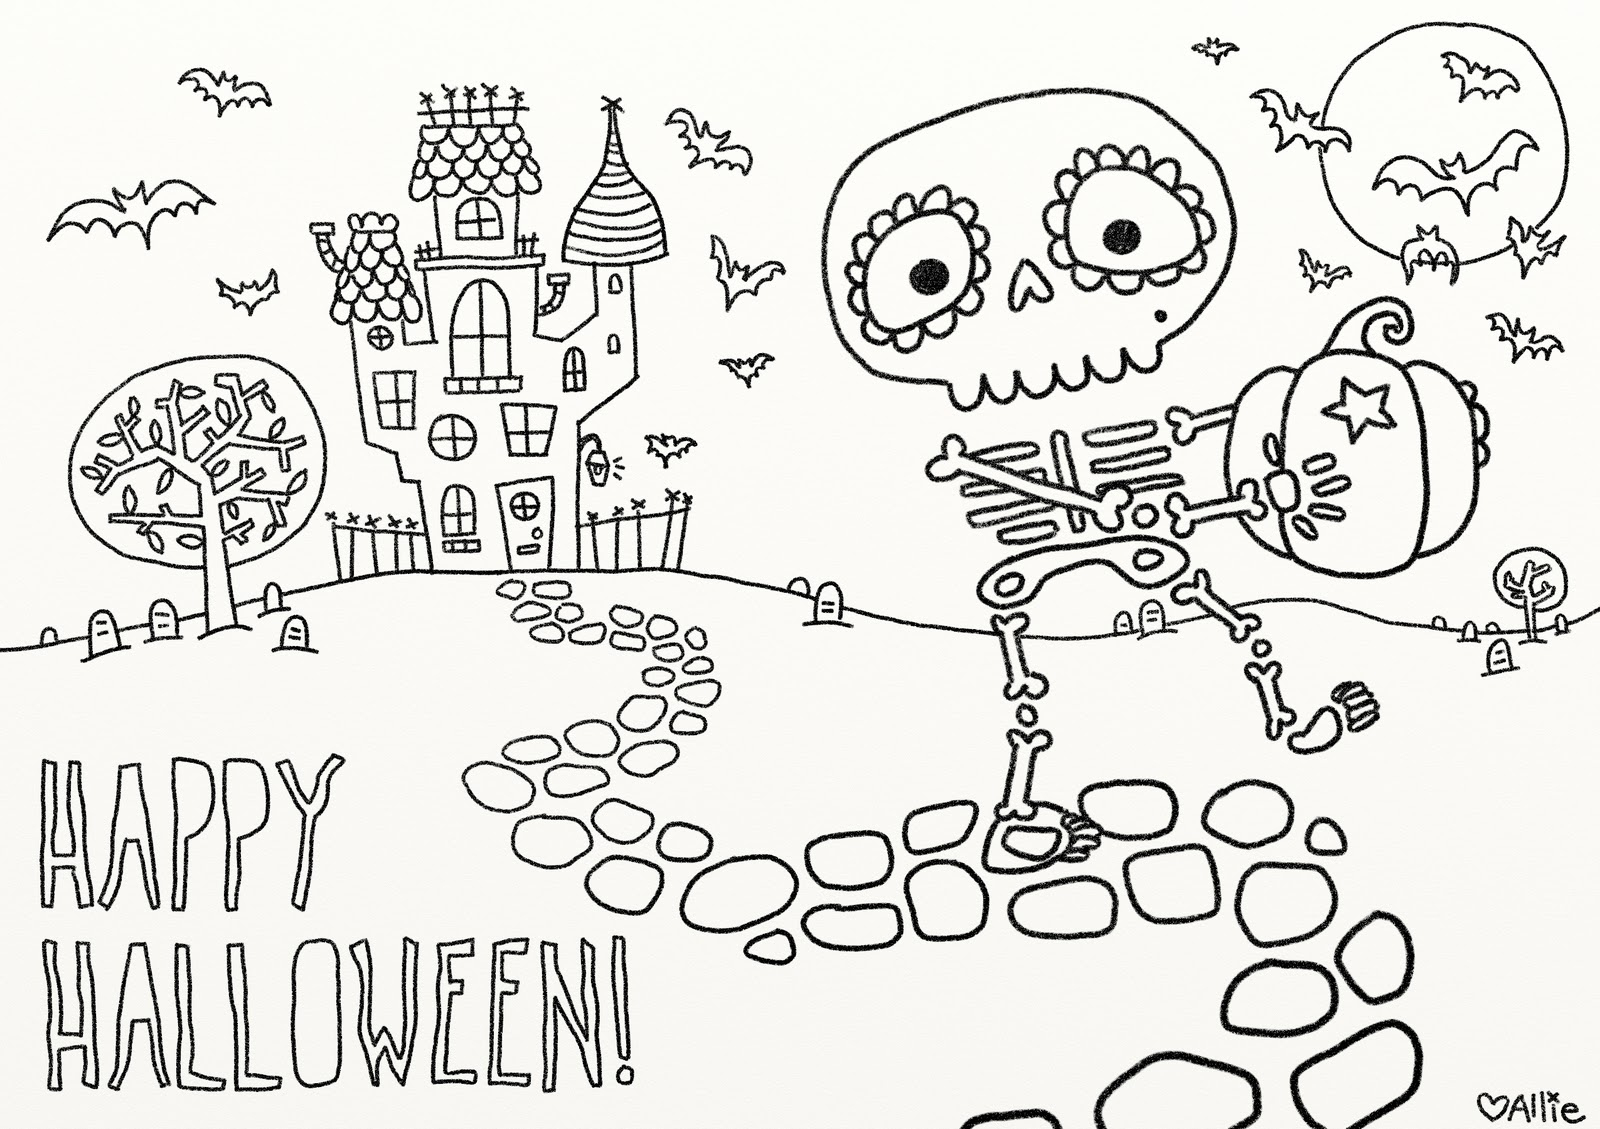 9 Fun Free Printable Halloween Coloring Pages - Printable Halloween Cards To Color For Free